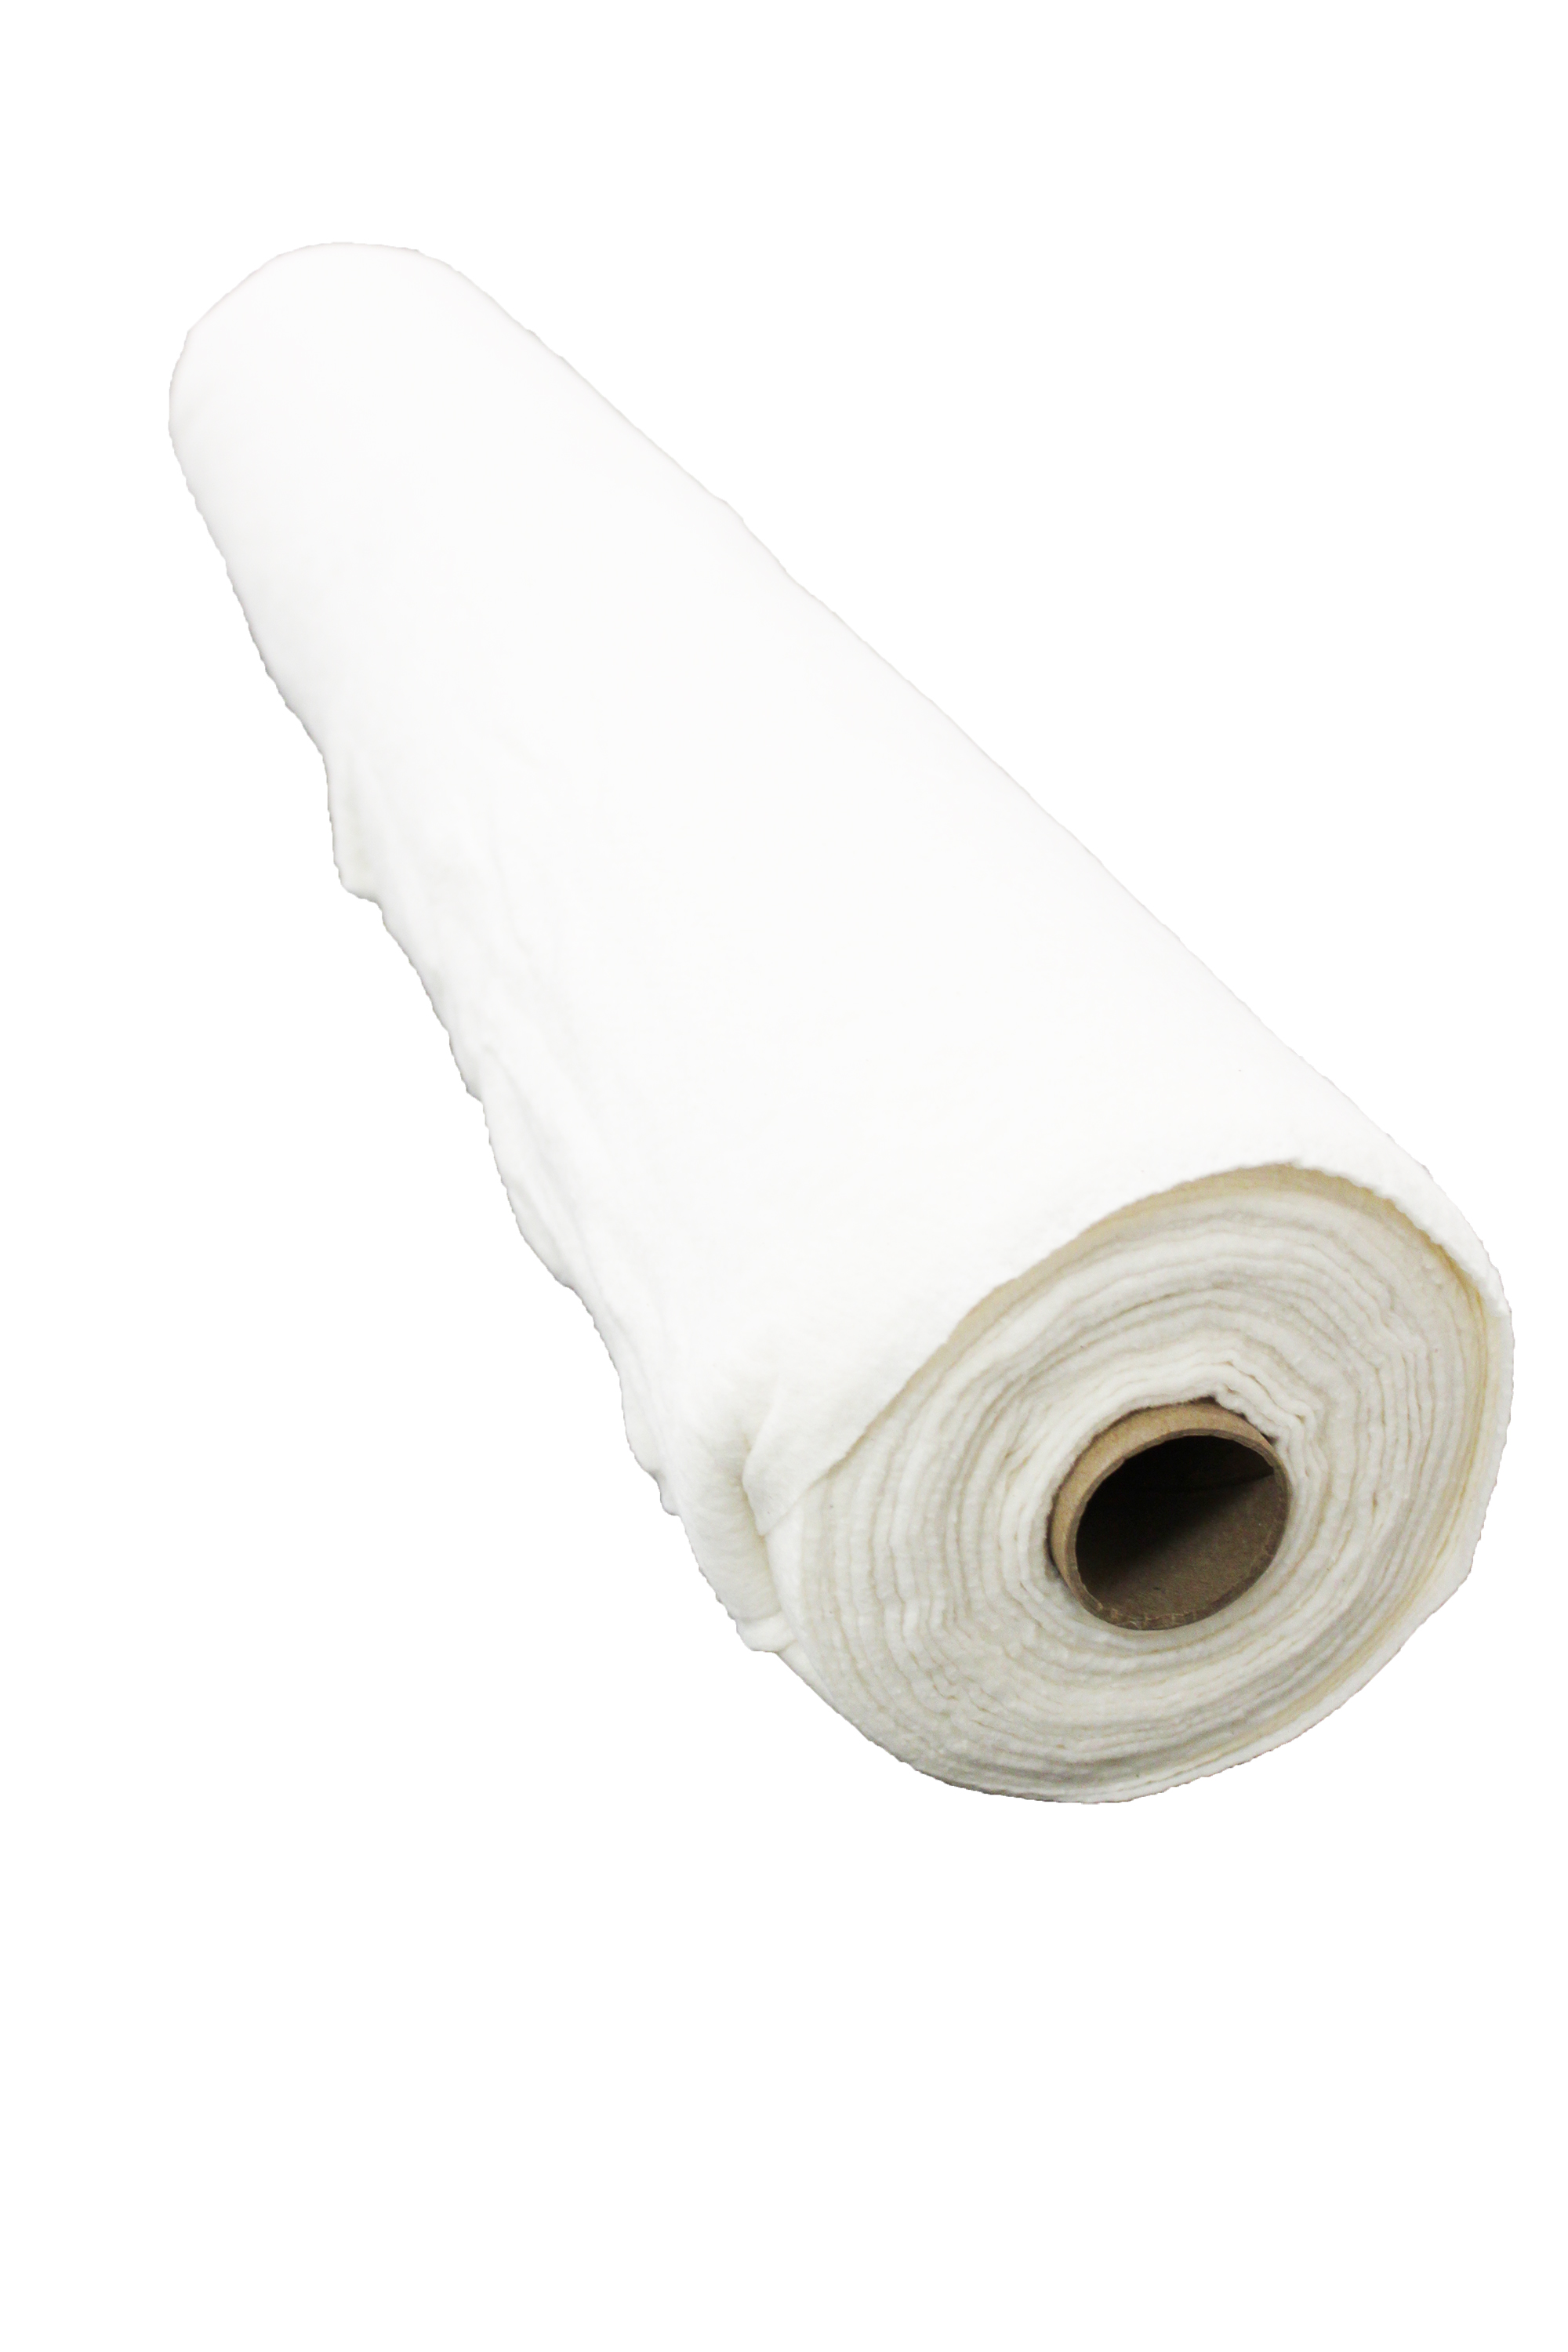 Pellon Polyester Quilting Batting, White 90 x 6 Yards by the Bolt 